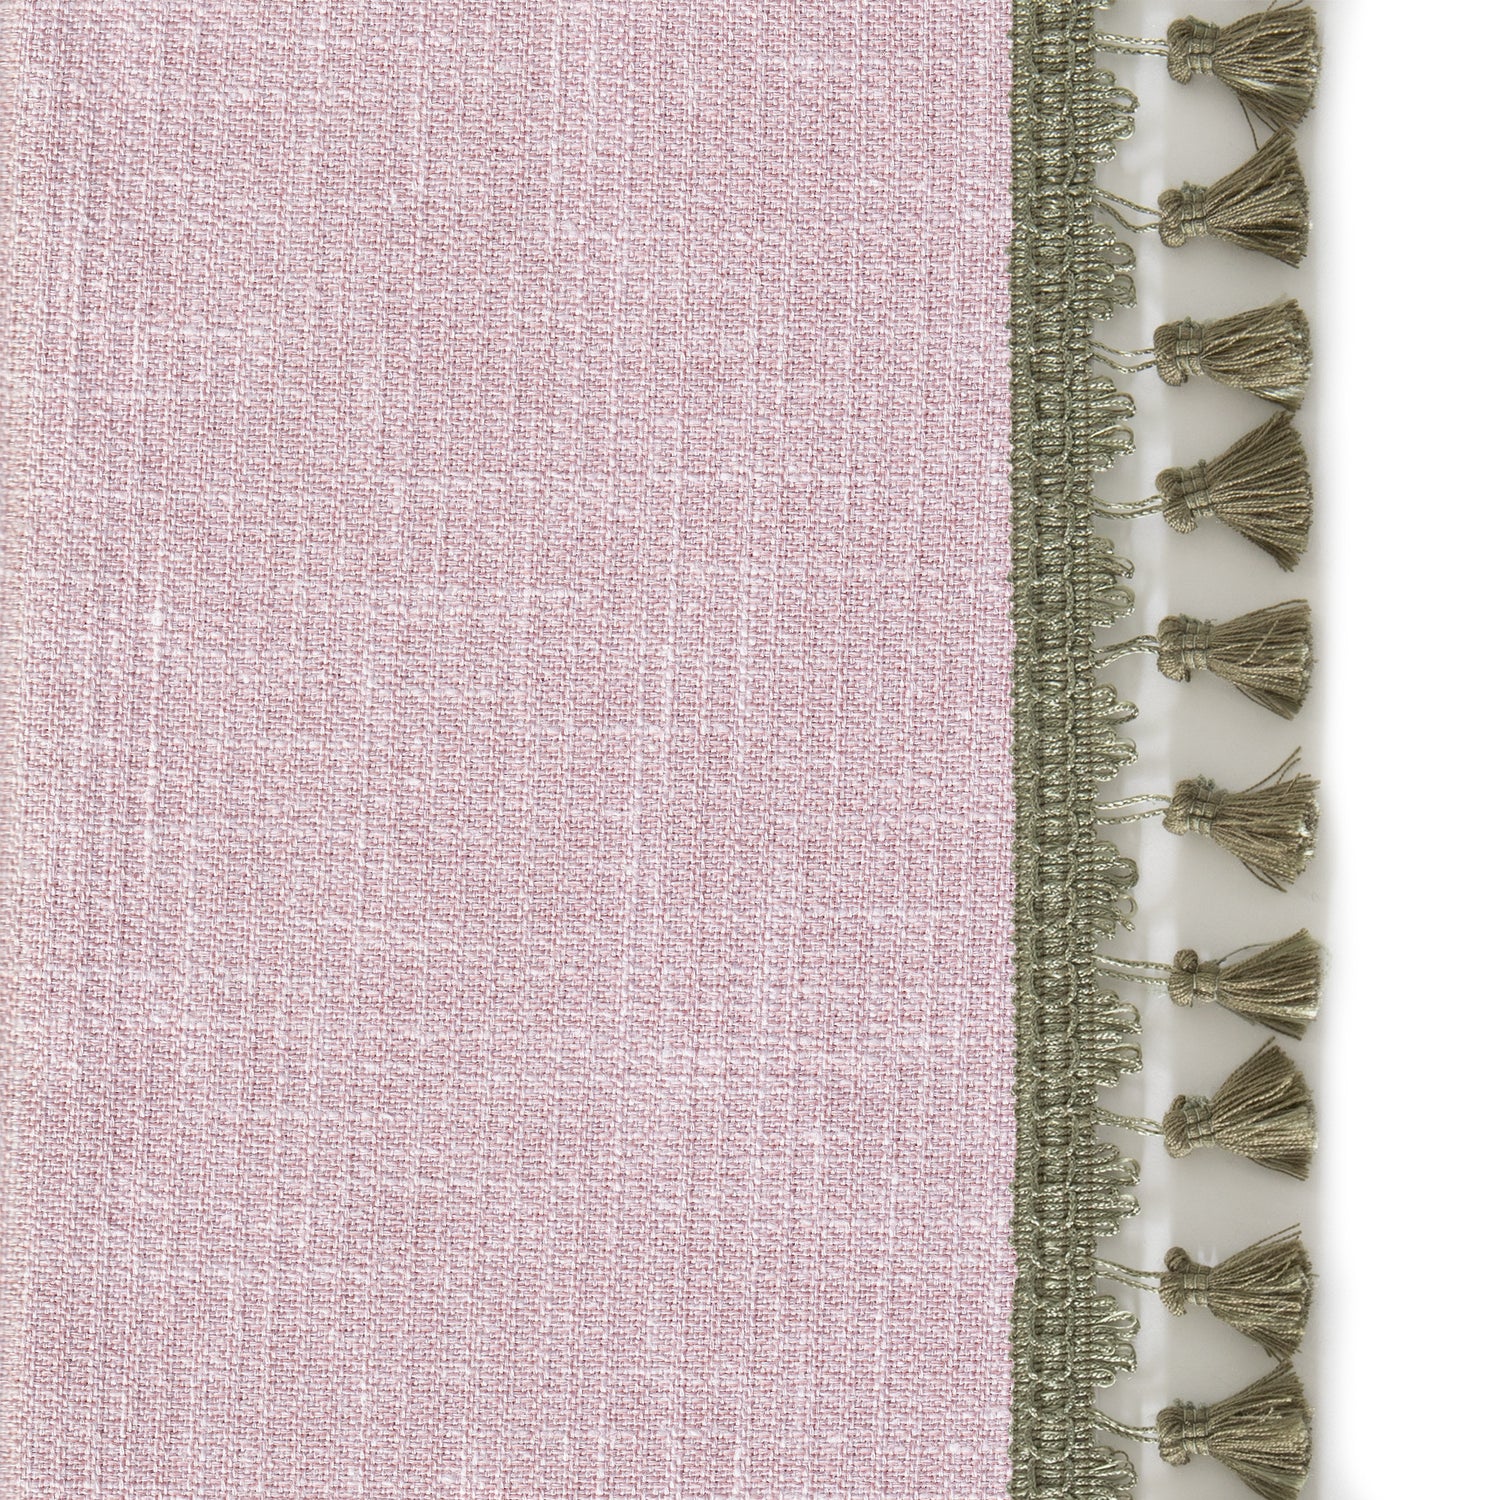 pink curtain with sage green tassels